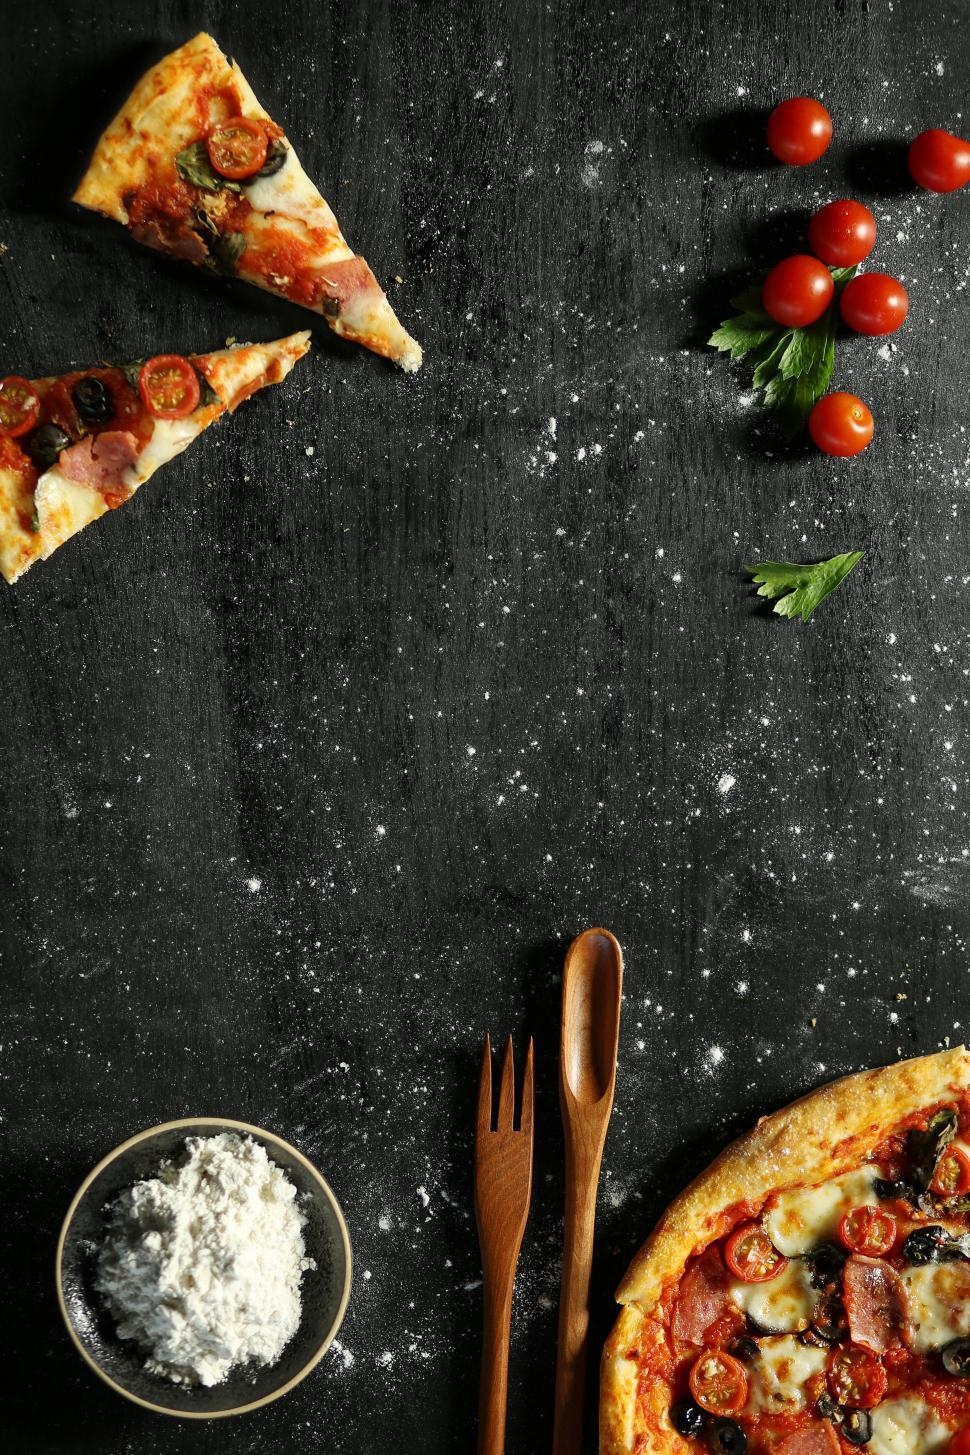 Download Free Stock Photo of Pizza slices and pizza on table on dark wooden table 